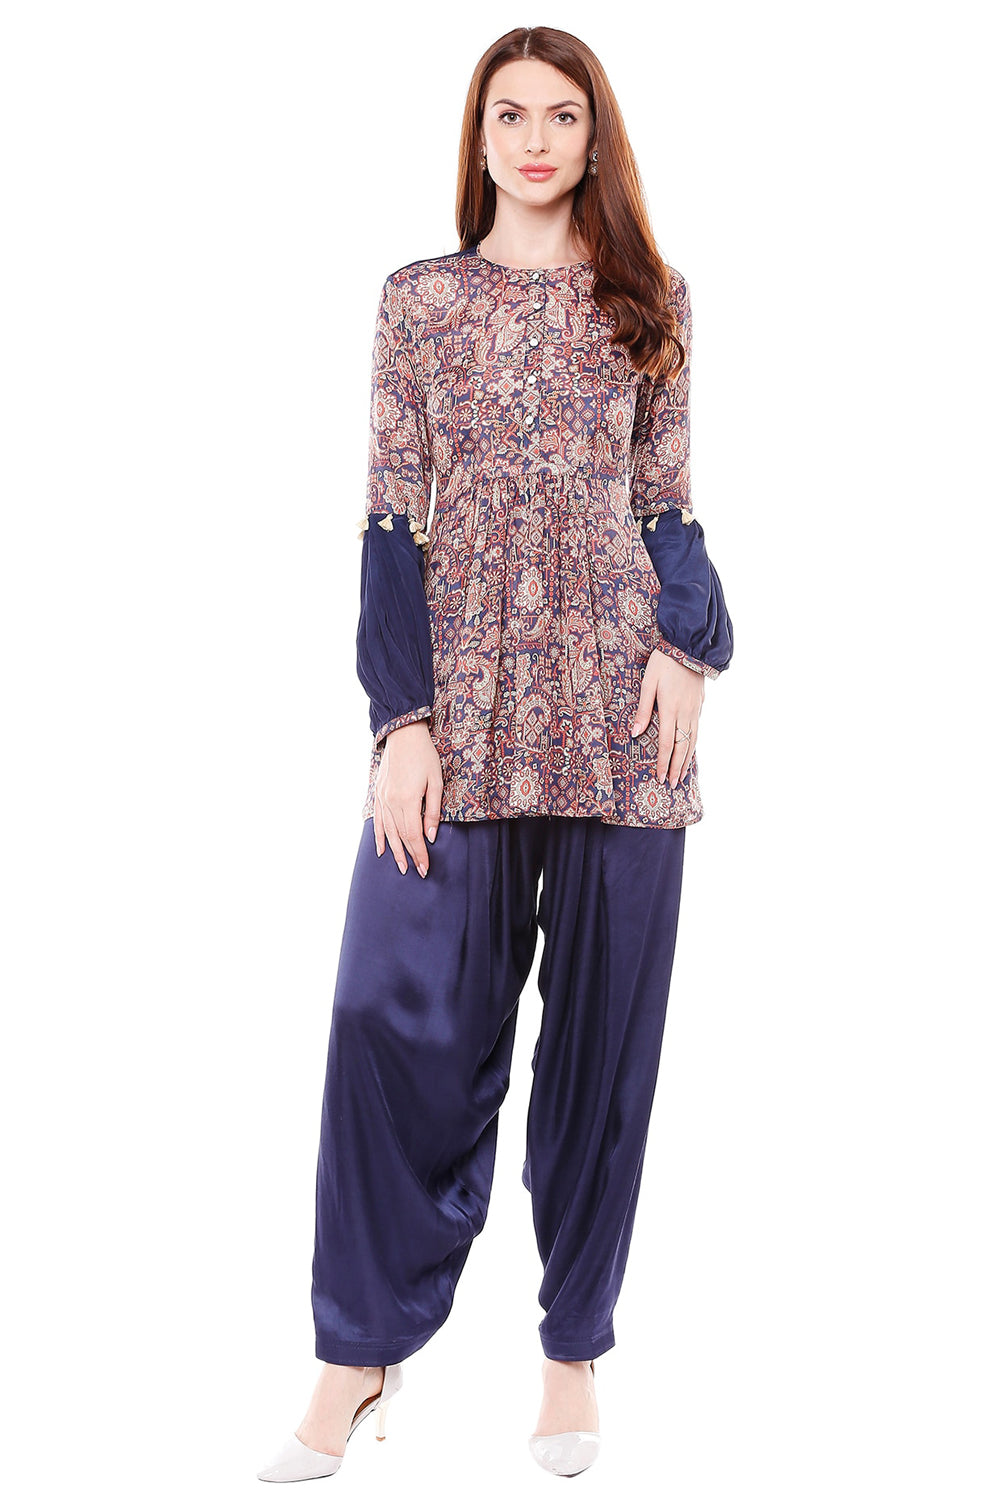 Madhubani Printed Gathered Top Paired With Pants